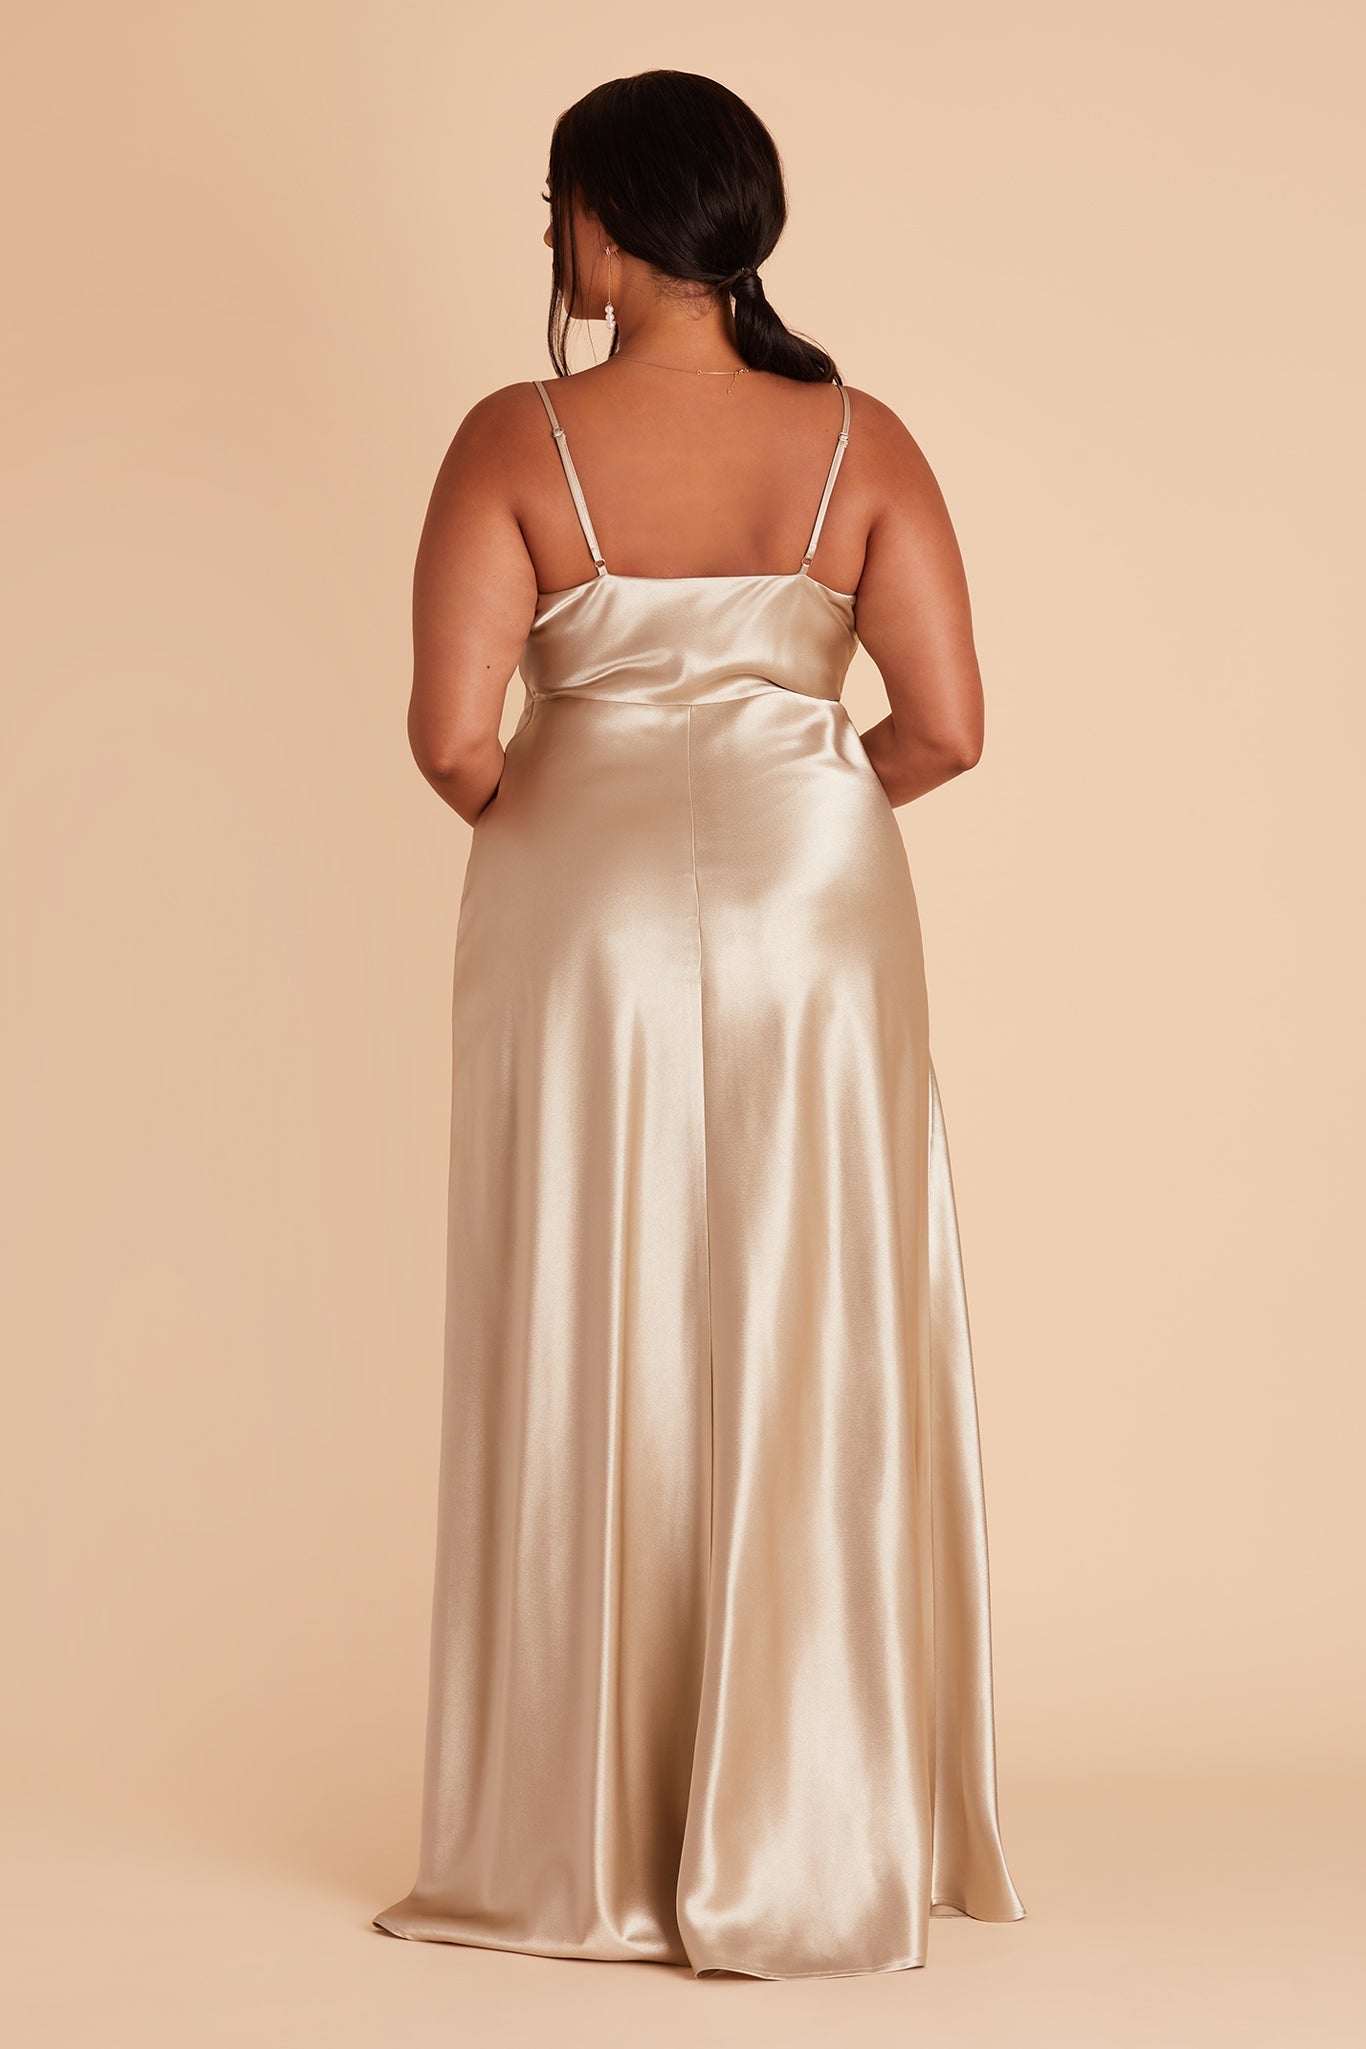 Back view of the Lisa Long Dress Curve in neutral champagne satin shows the back of the dress with adjustable spaghetti straps and a smooth fit in the bodice and waist that attach to a full length skirt.  